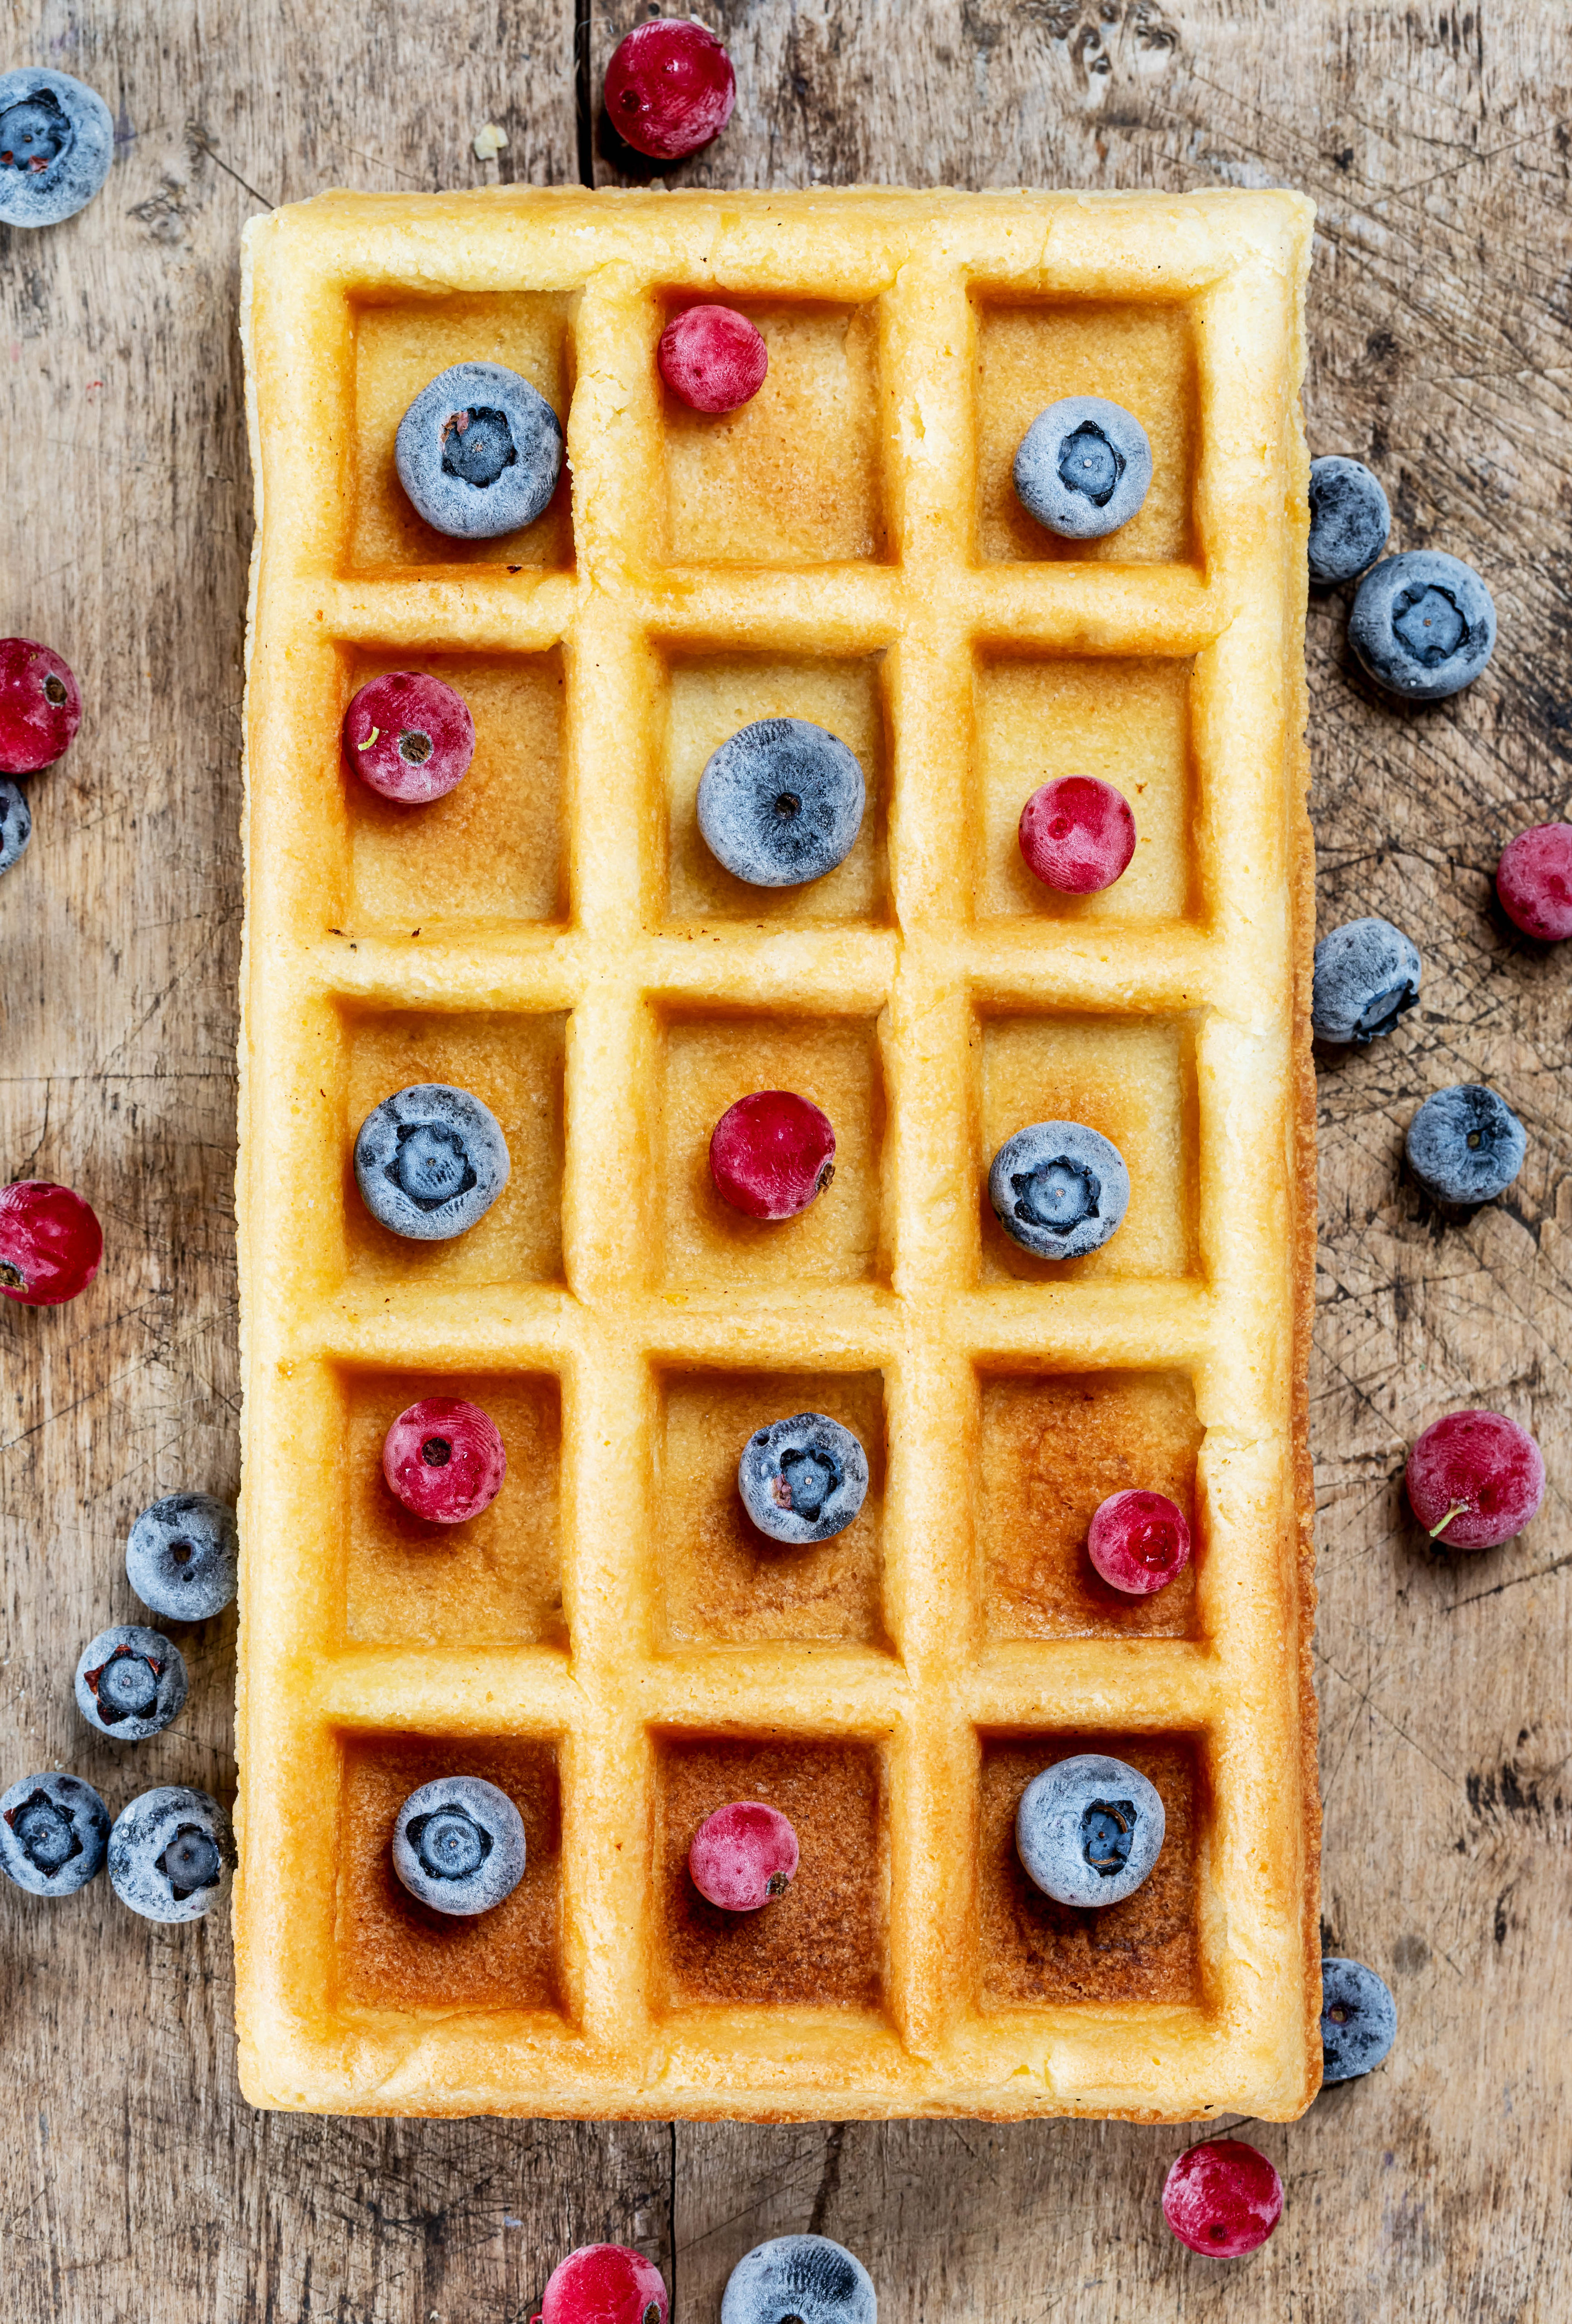 72113 download wallpaper fruits, food, waffles, berries, vienna waffles, viennese waffles screensavers and pictures for free